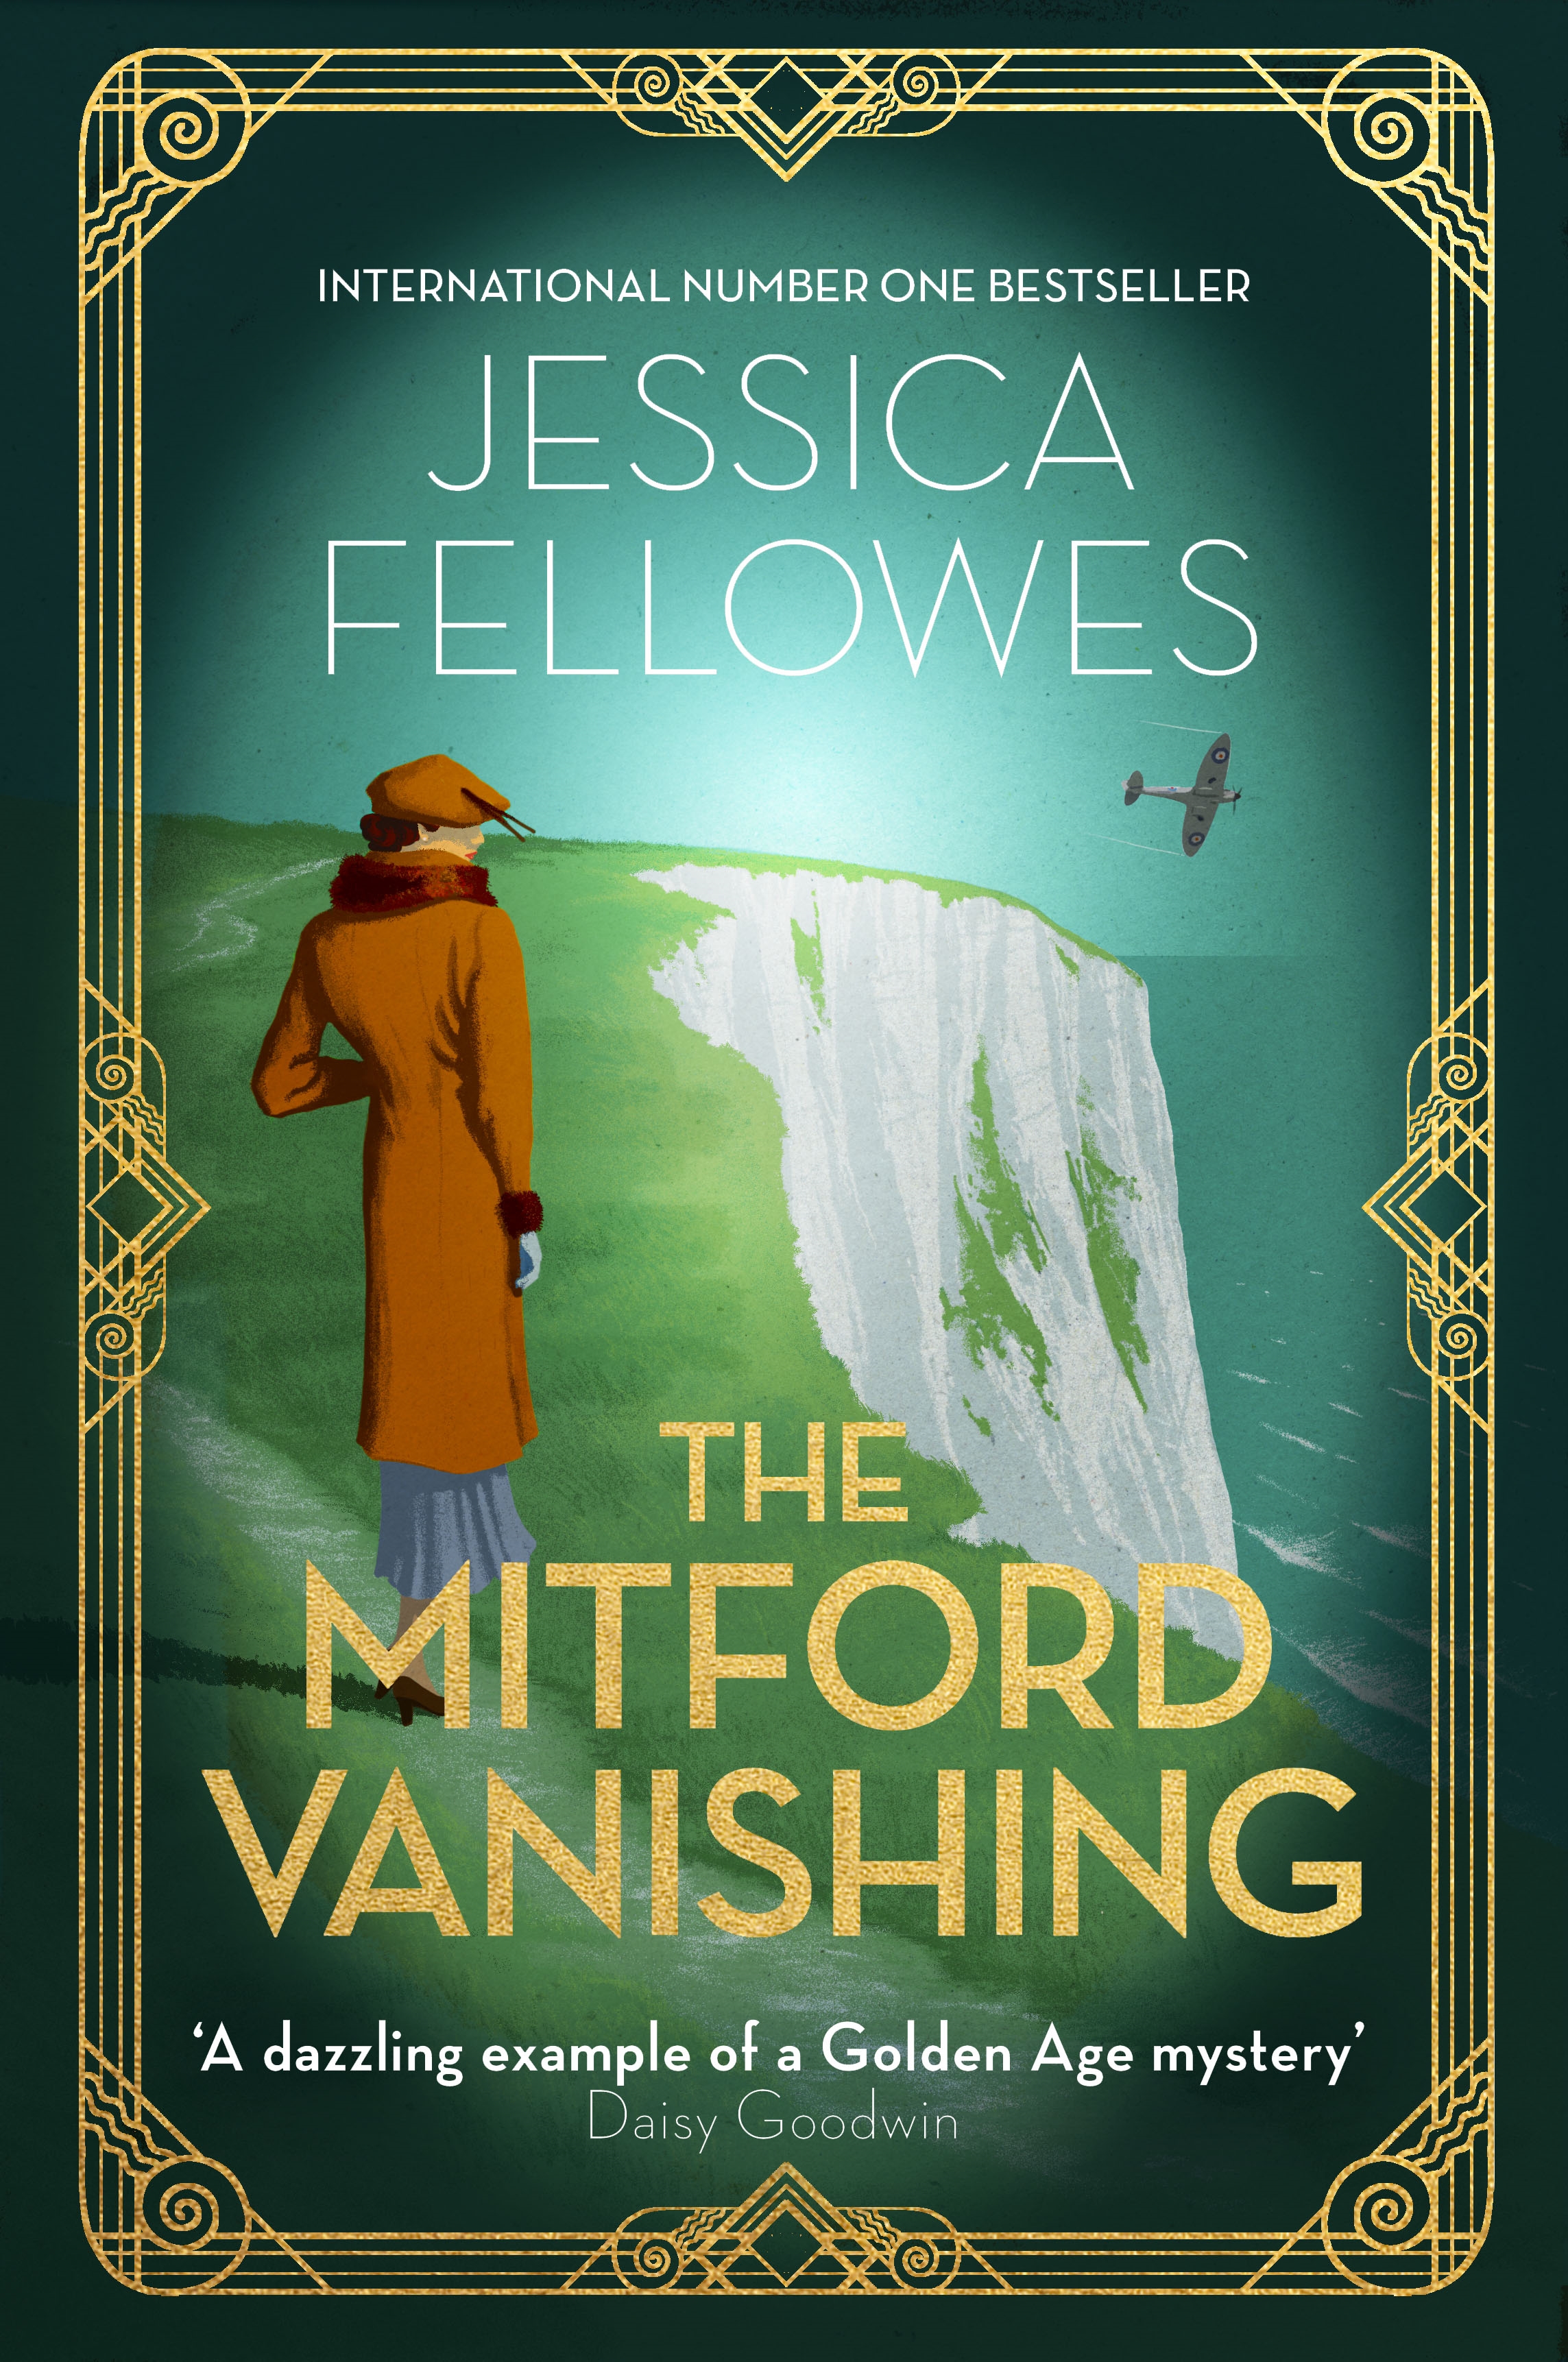 The Mitford Vanishing book cover image